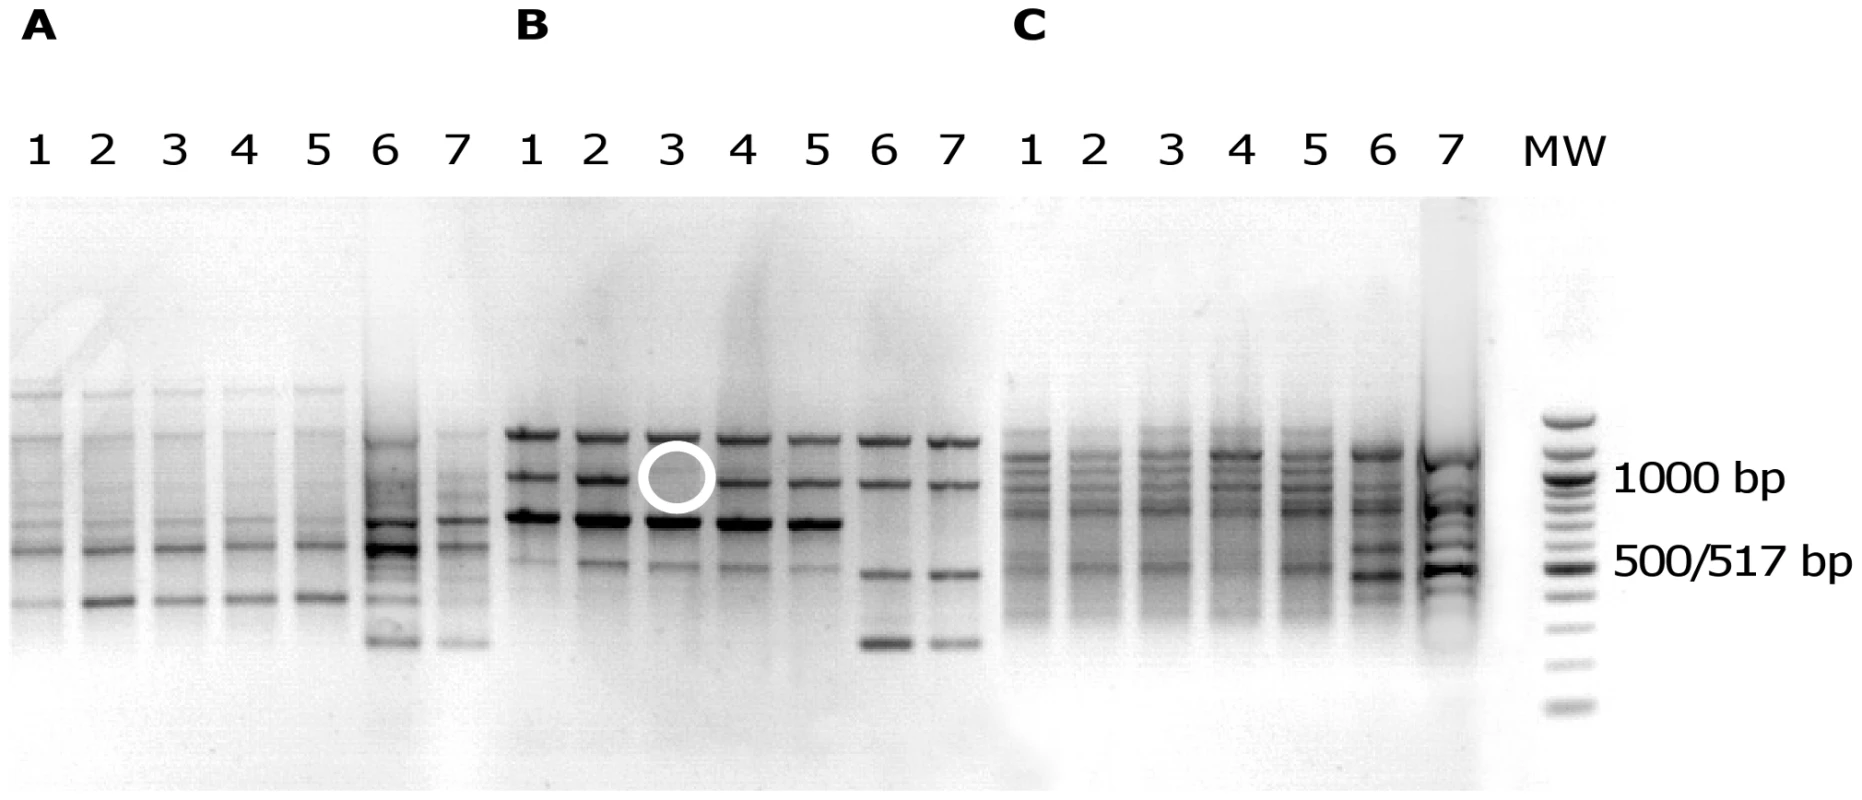 Electrophoretic patterns in agarose gel of PCR products from <i>E. coli</i> isolates.